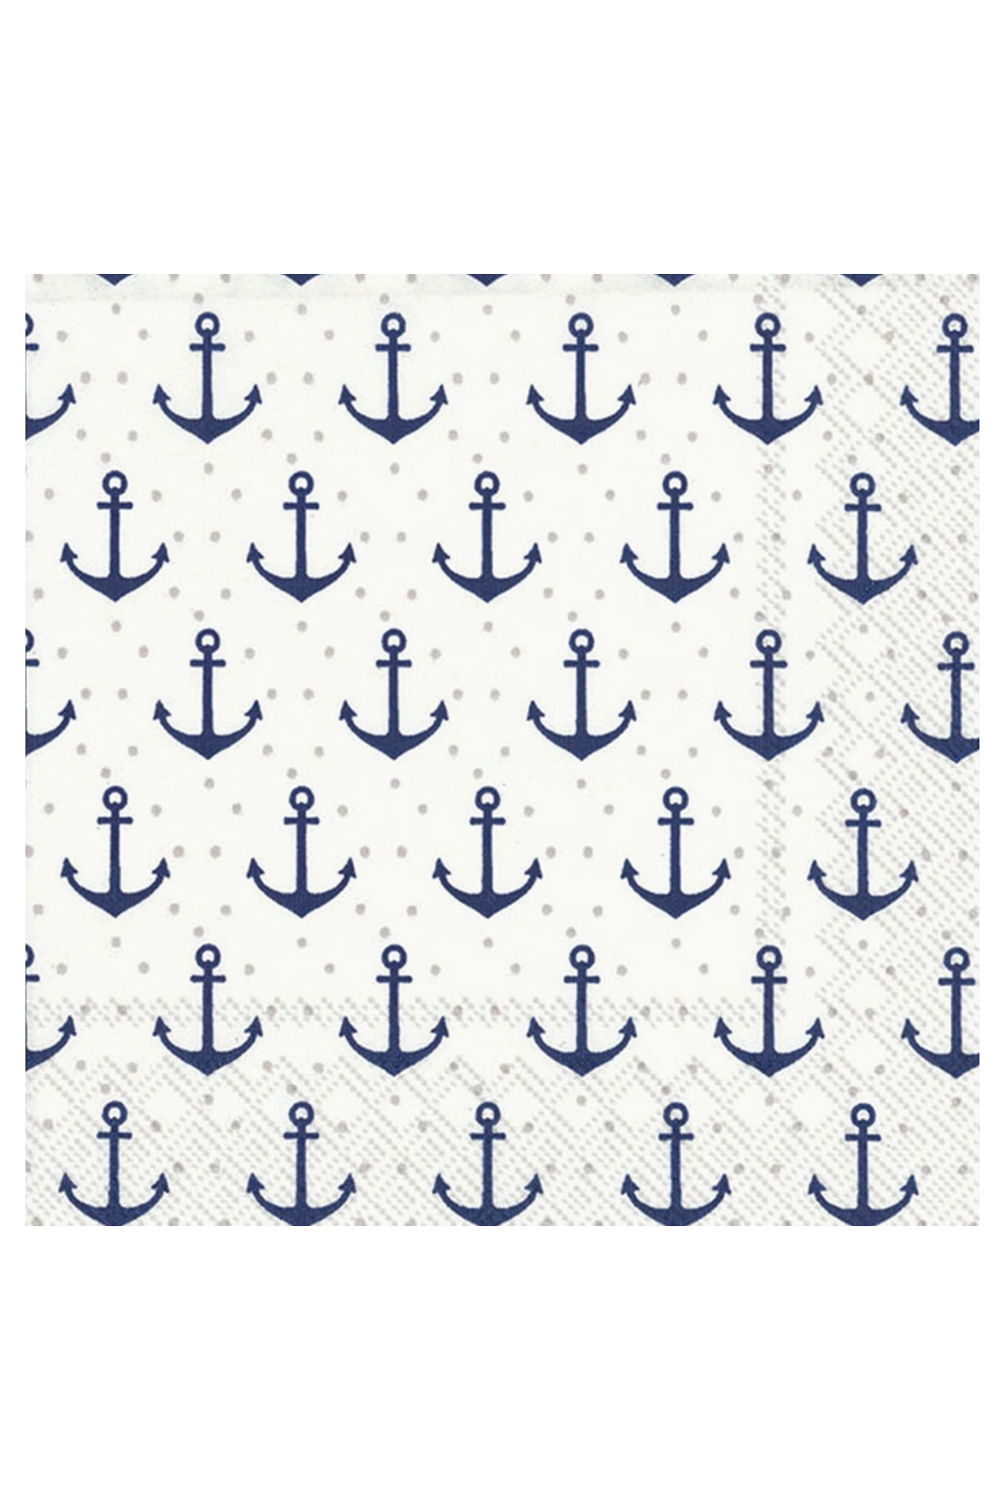 Cocktail Napkin Pack - Anchor Dots Blue Grey